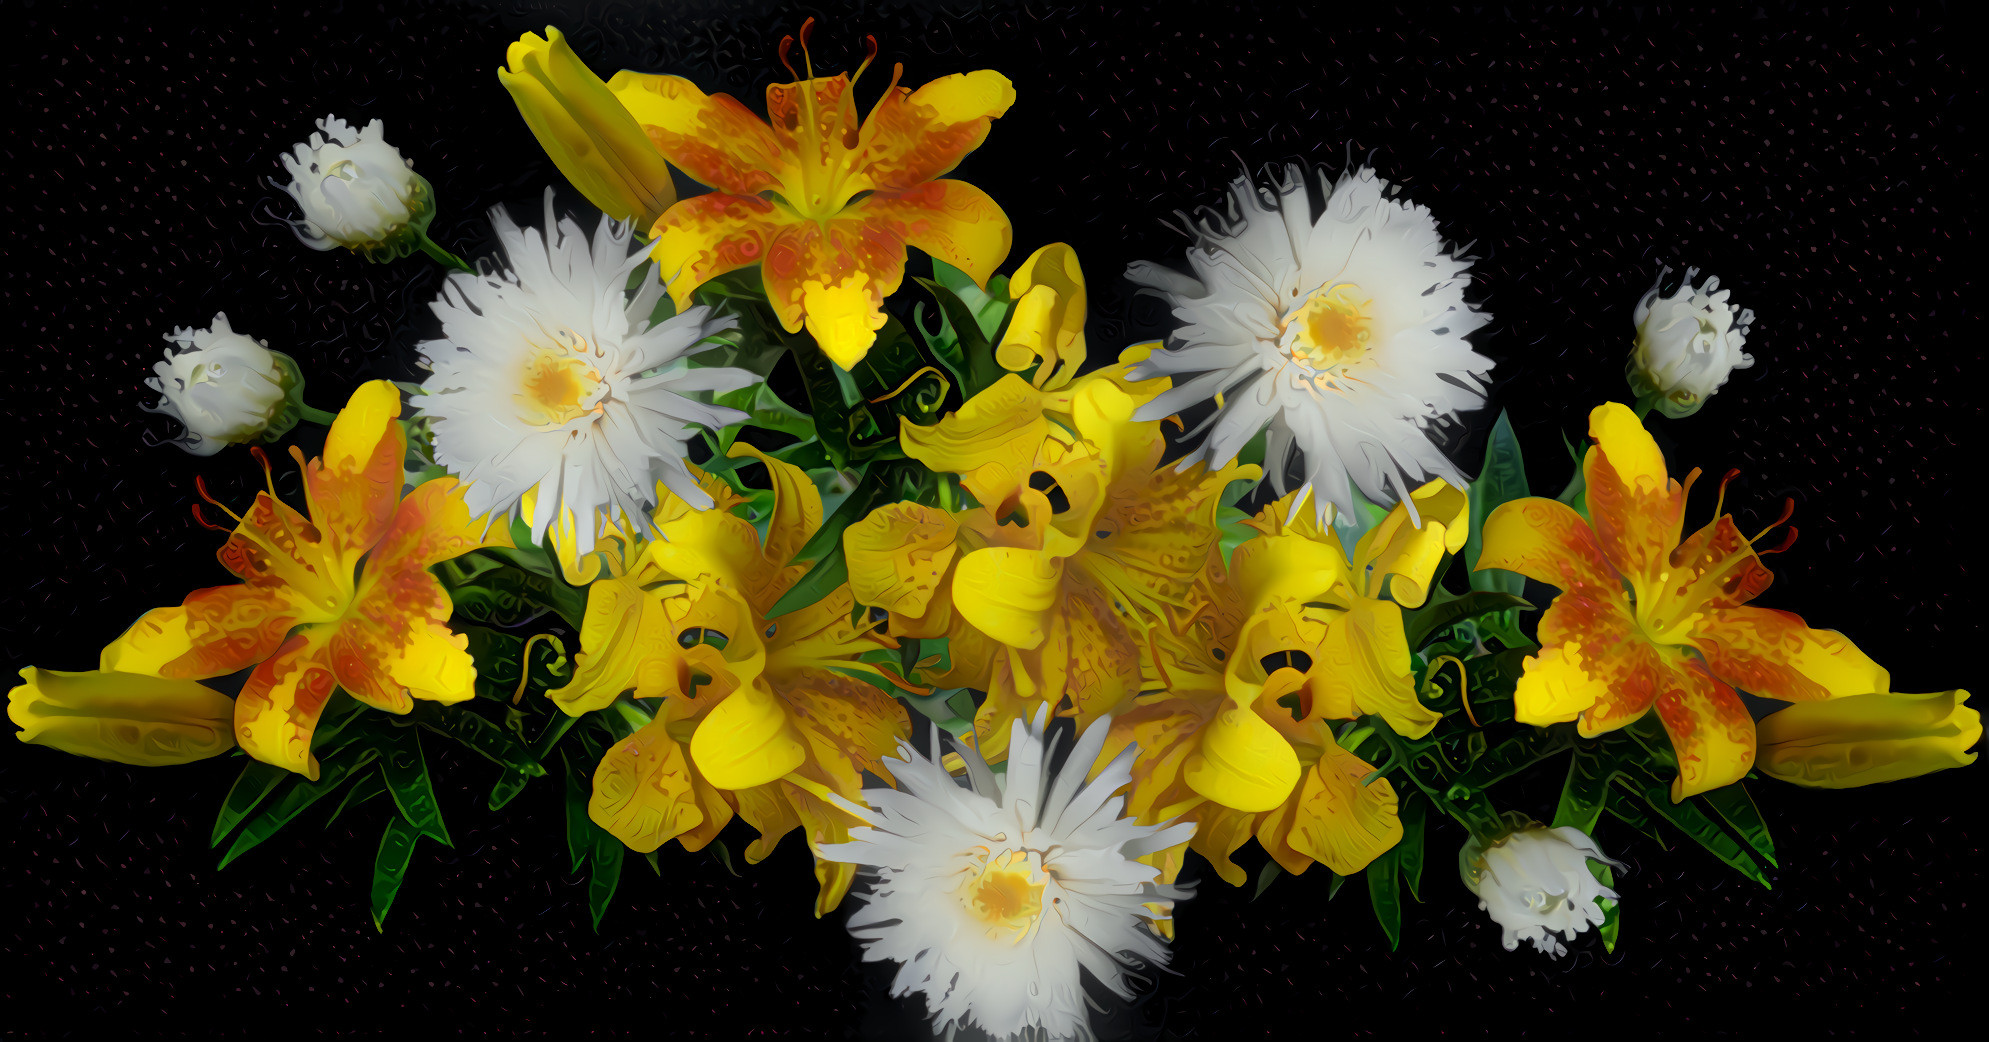 Daisies and Lilies Bouquet